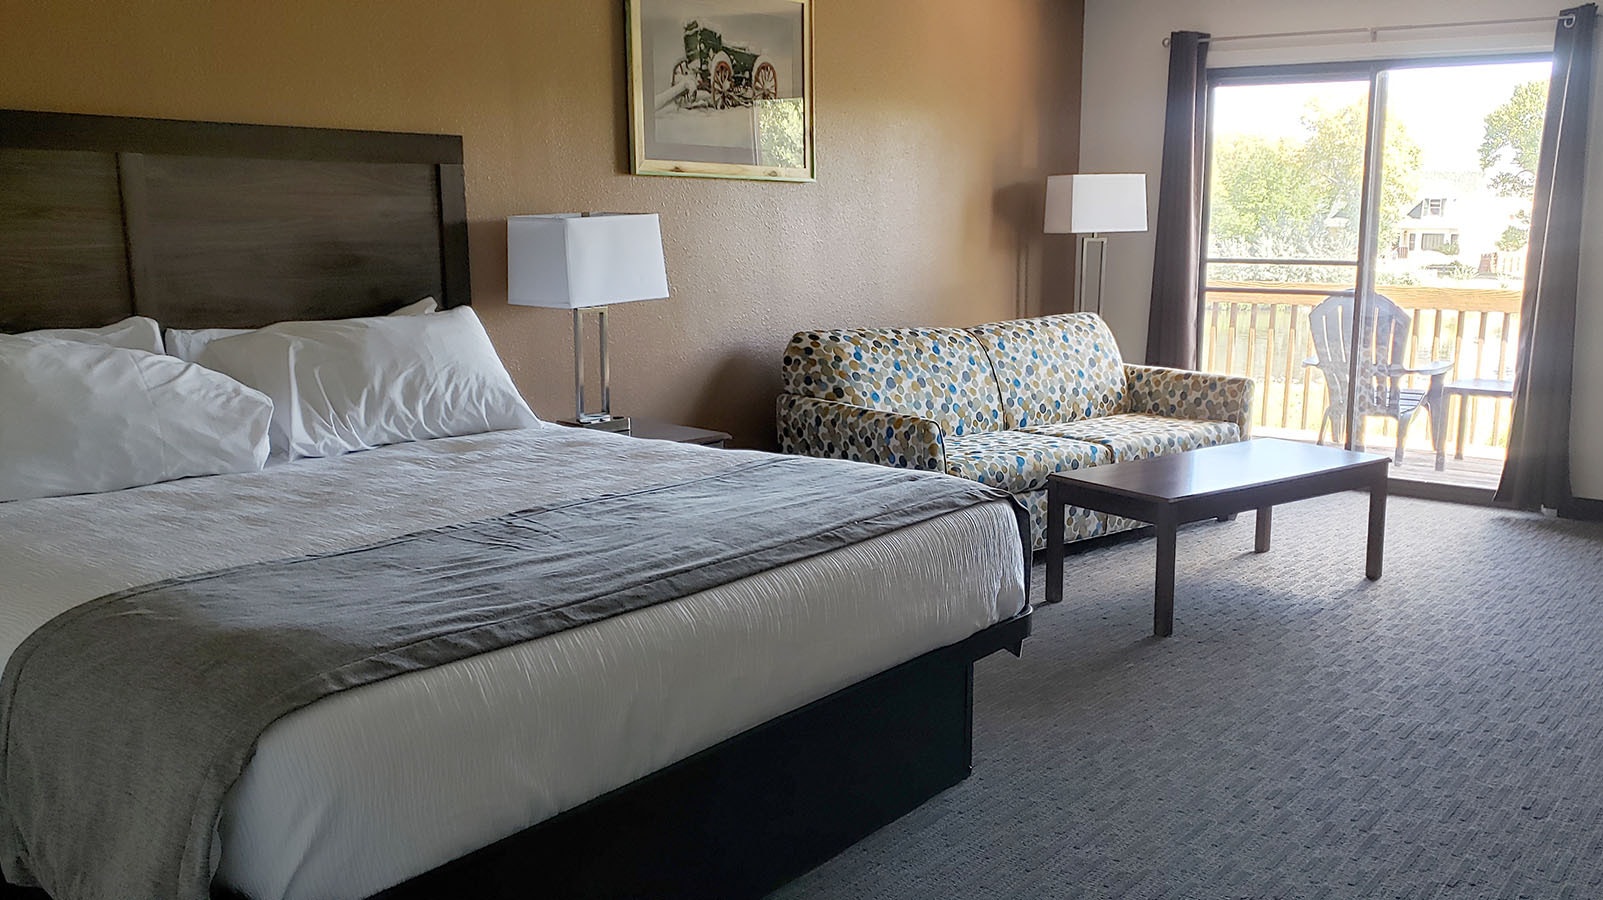 The bedroom suite overlooking the river is a little larger than other rooms at the Riviera Motor Lodge.